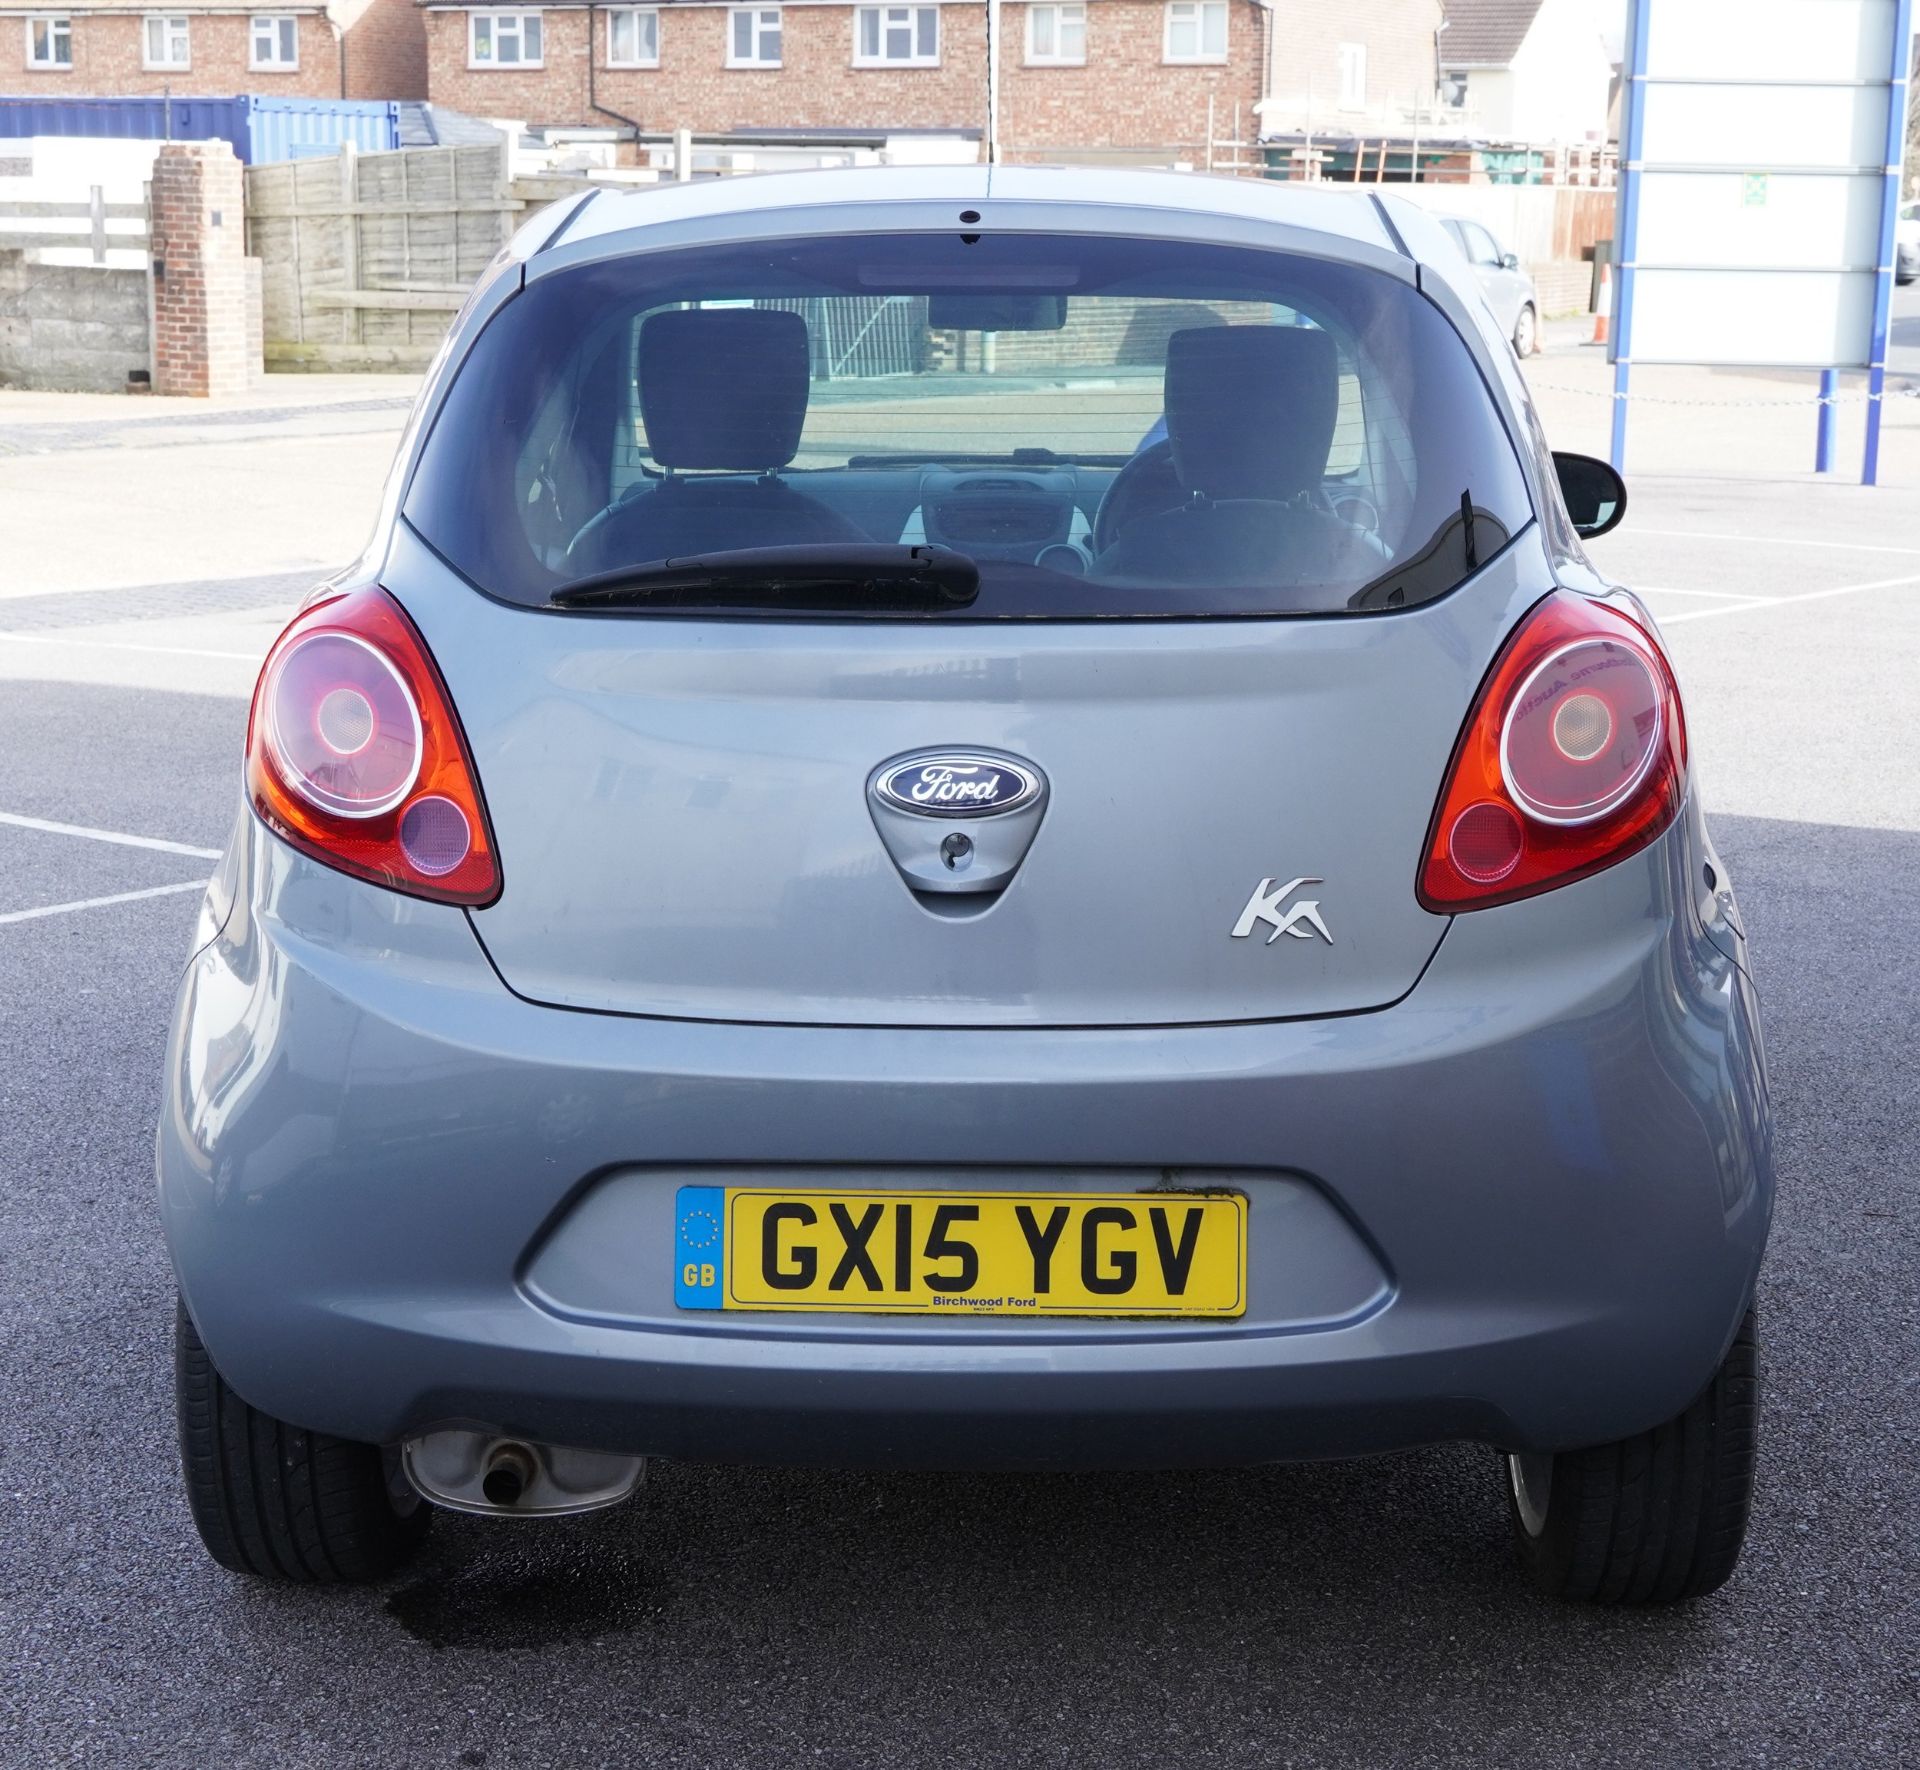 2015 manual Ford KA Zetec. 1.2 petrol three door hatchback, Reg GX15 YGV, One owner from new, 7434 - Image 6 of 15